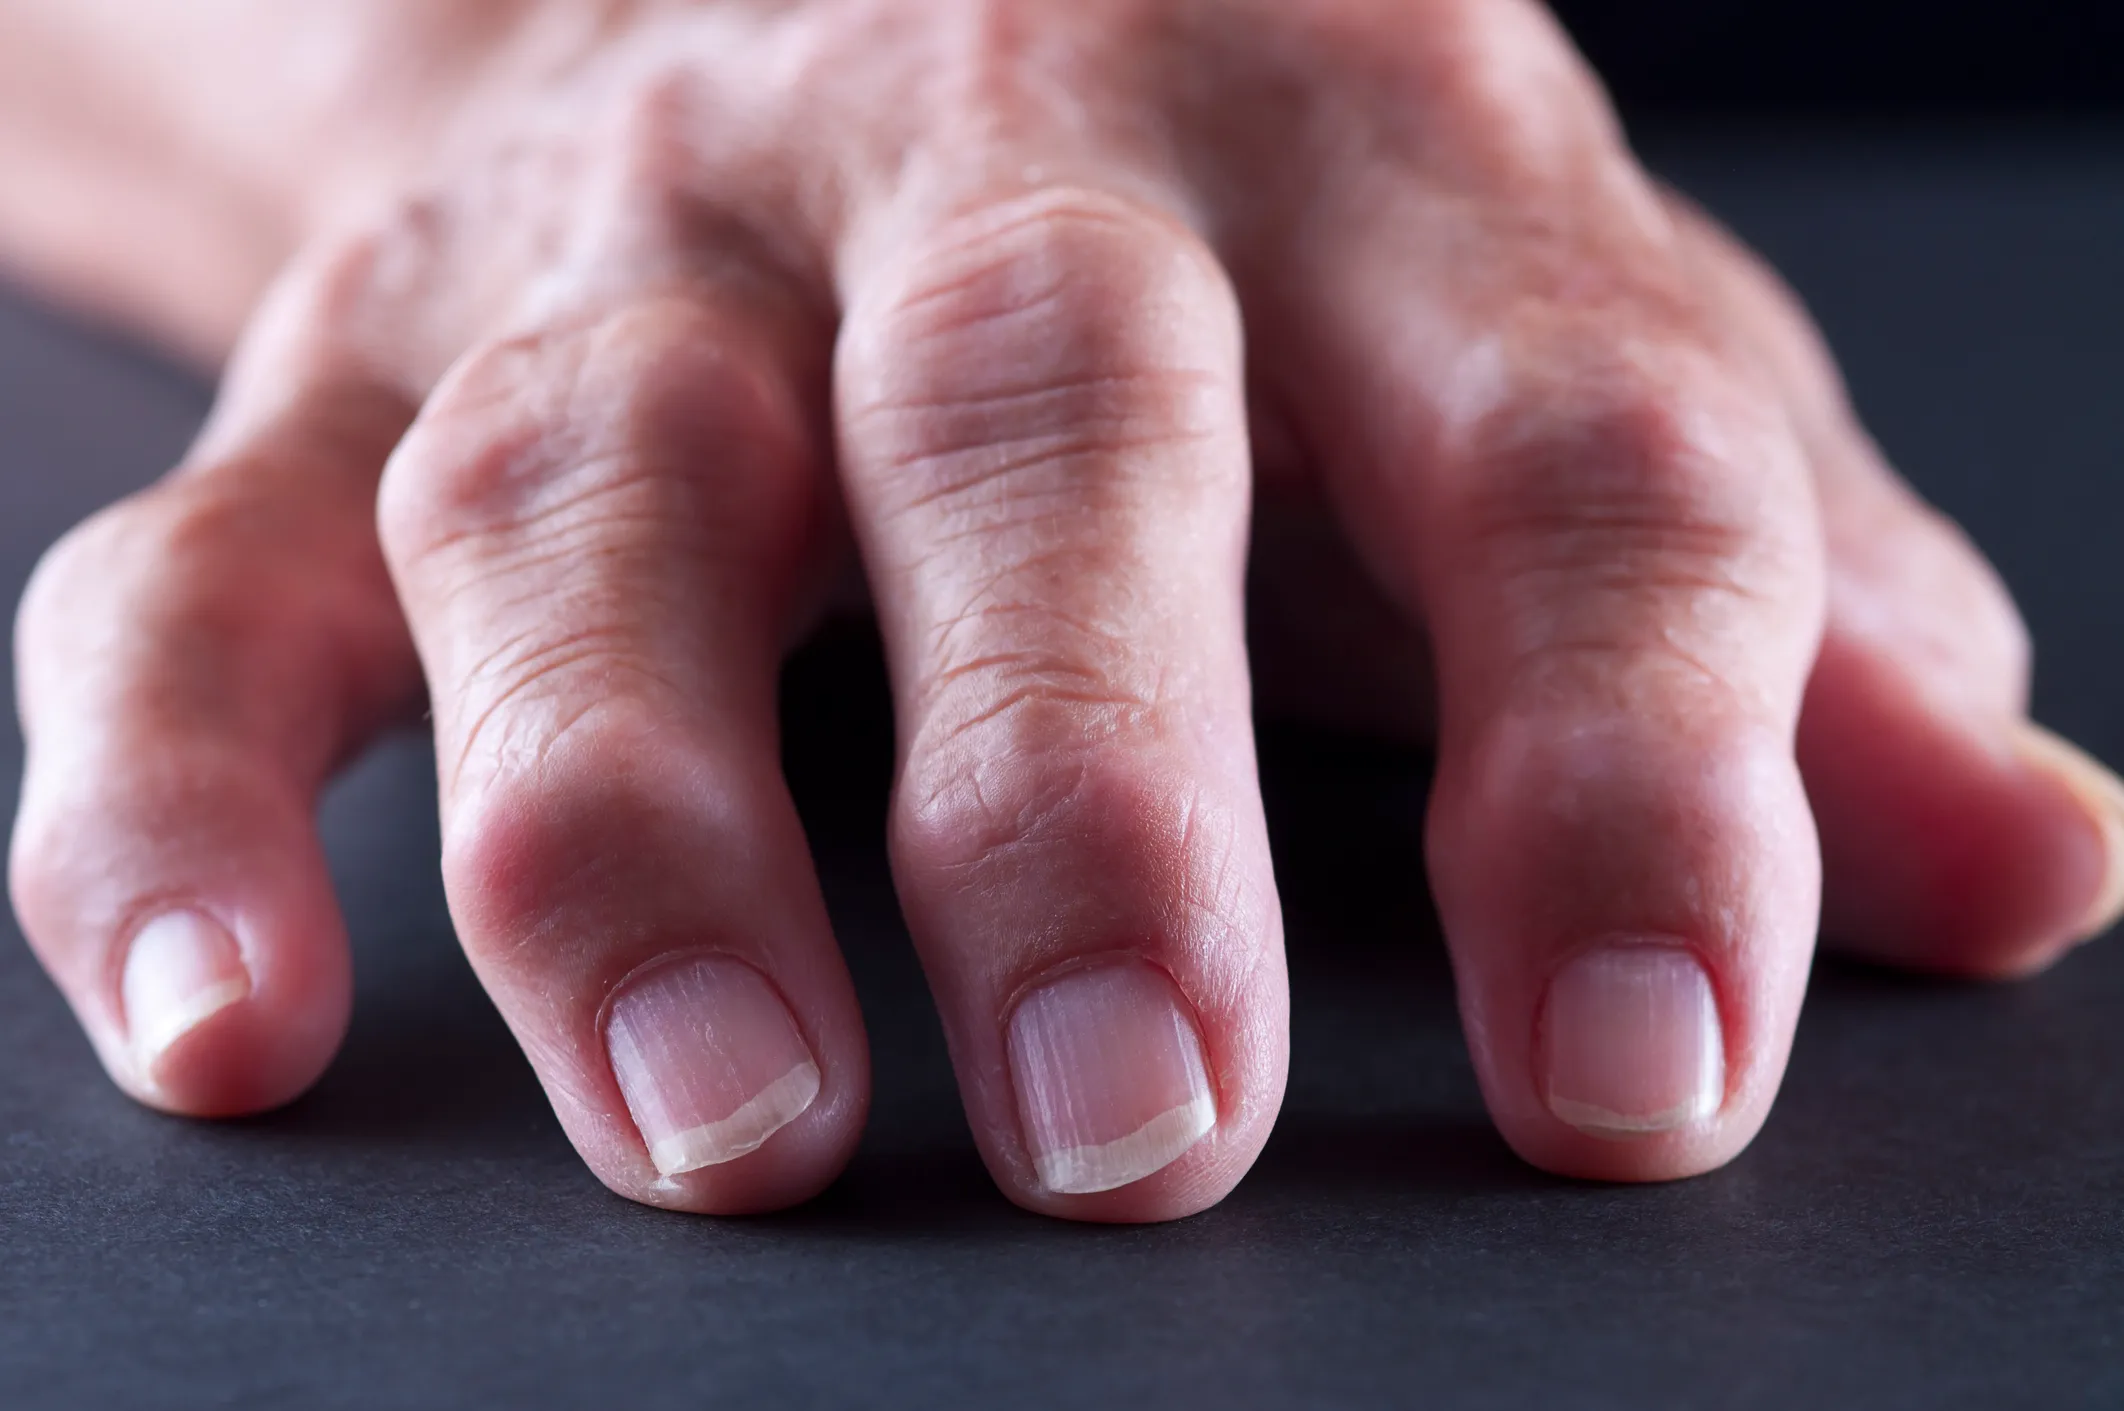 Do You Know the Early Signs of Psoriatic Arthritis?